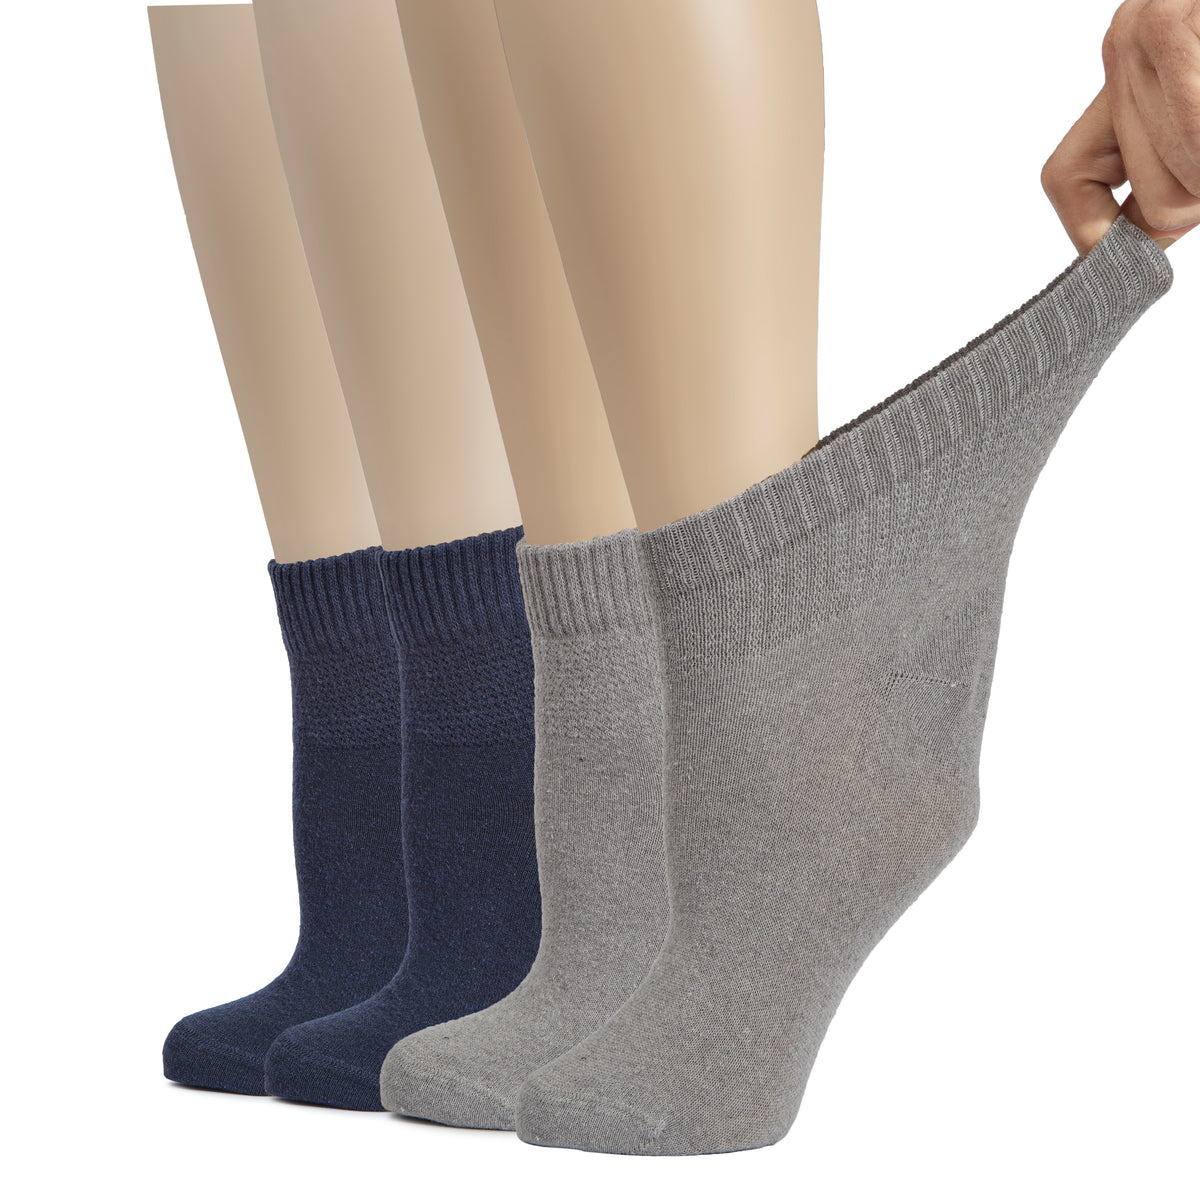 Hugh Ugoli Cotton Diabetic Women's Socks, Ankle Height, Loose, Wide Stretchy, Thin, Seamless Toe and Non-Binding Top, 4 Pairs | Shoe Size: 10-12 | LightBeige / Black